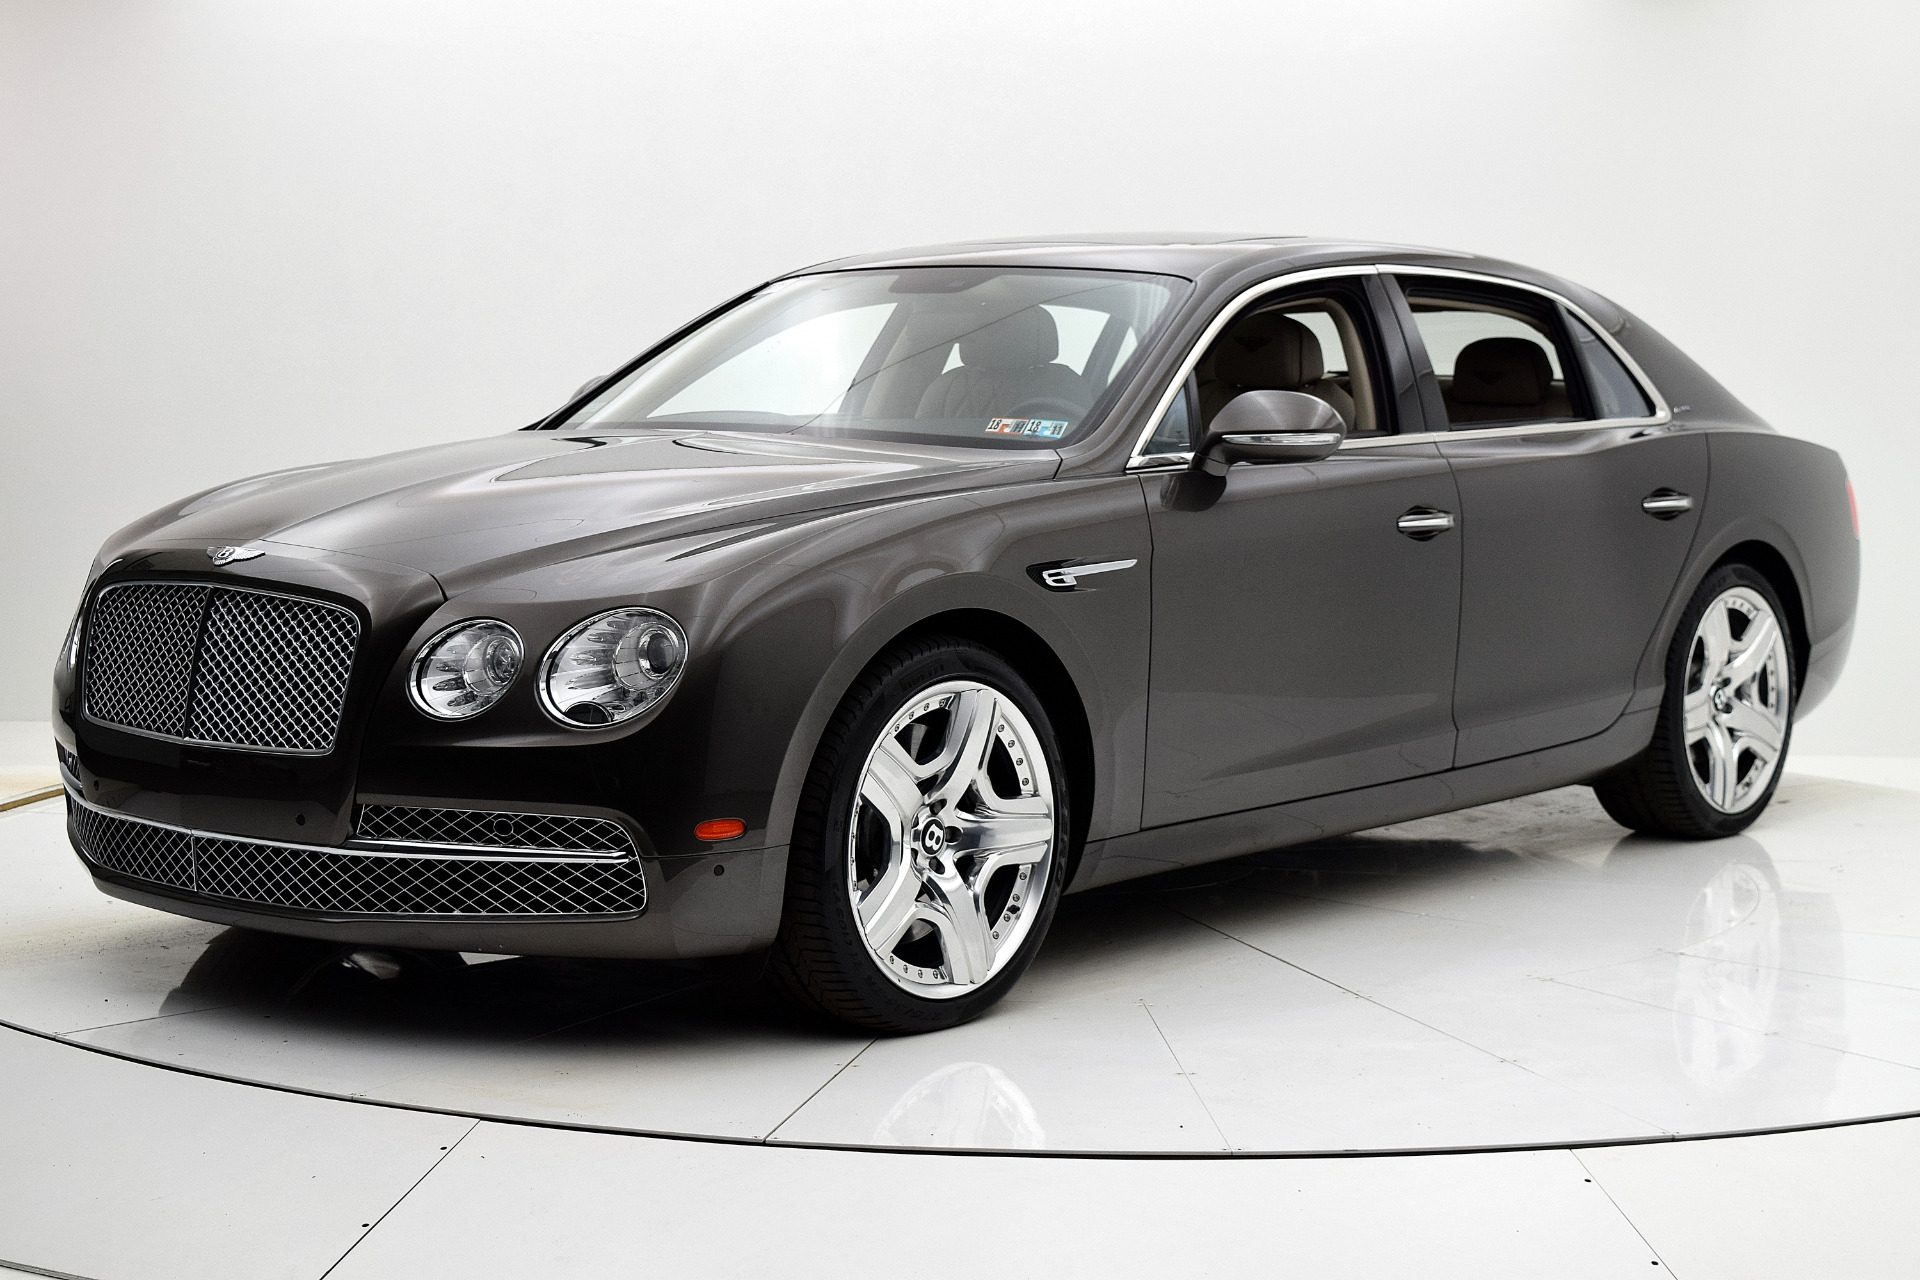 Used 2014 Bentley Flying Spur W12 for sale Sold at F.C. Kerbeck Aston Martin in Palmyra NJ 08065 2